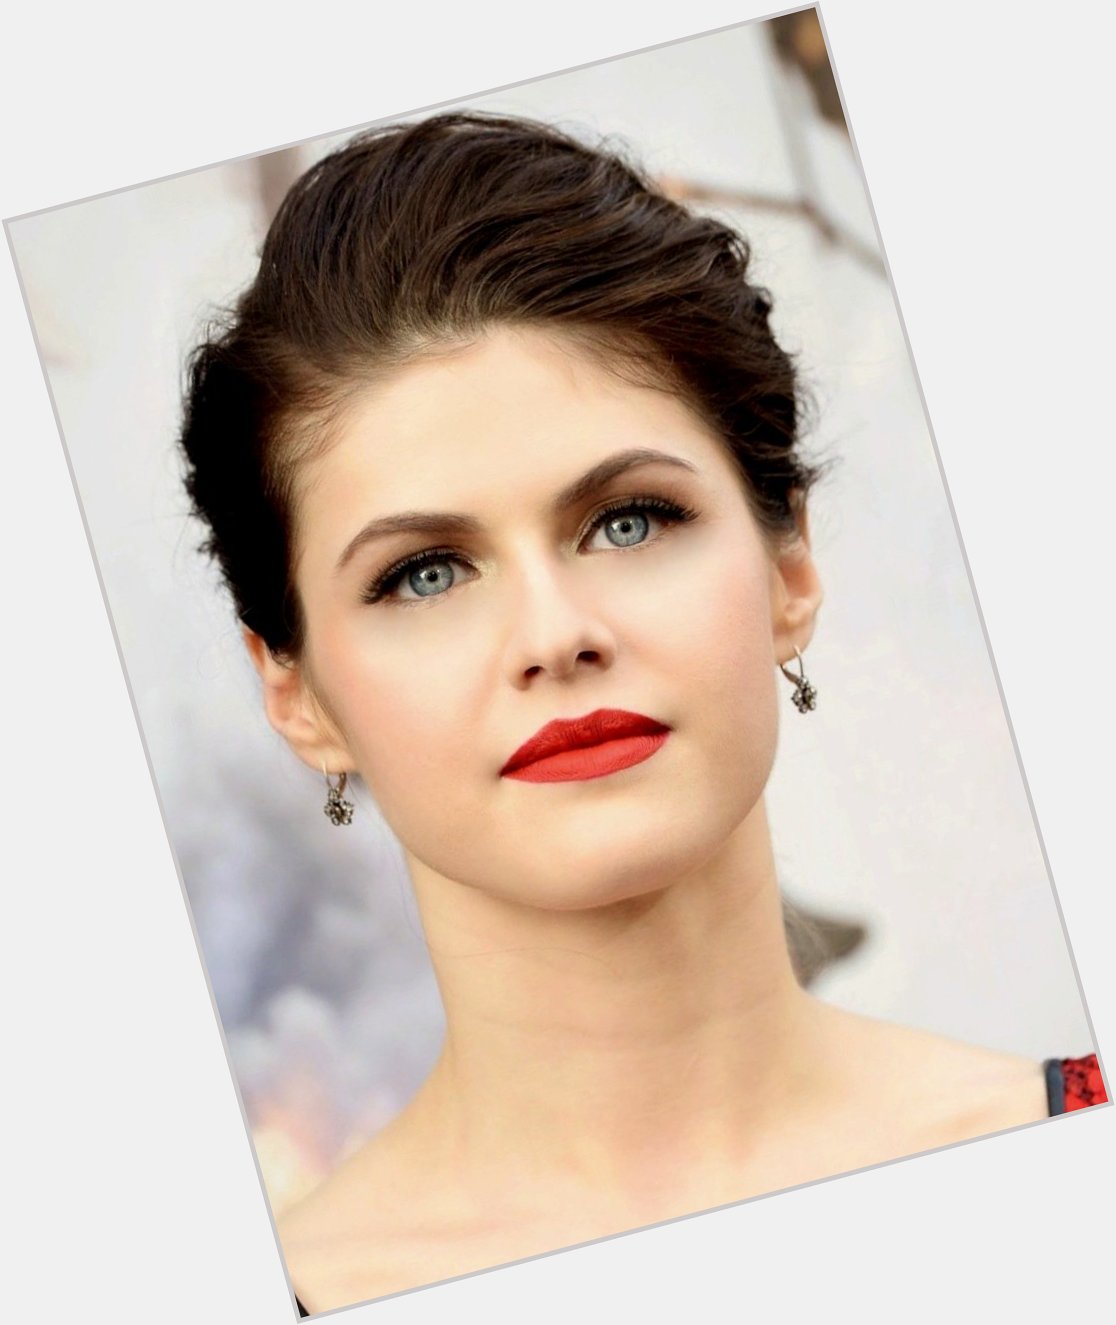 Alexandra Daddario March 16 Sending Very Happy Birthday Wishes! All the Best!  